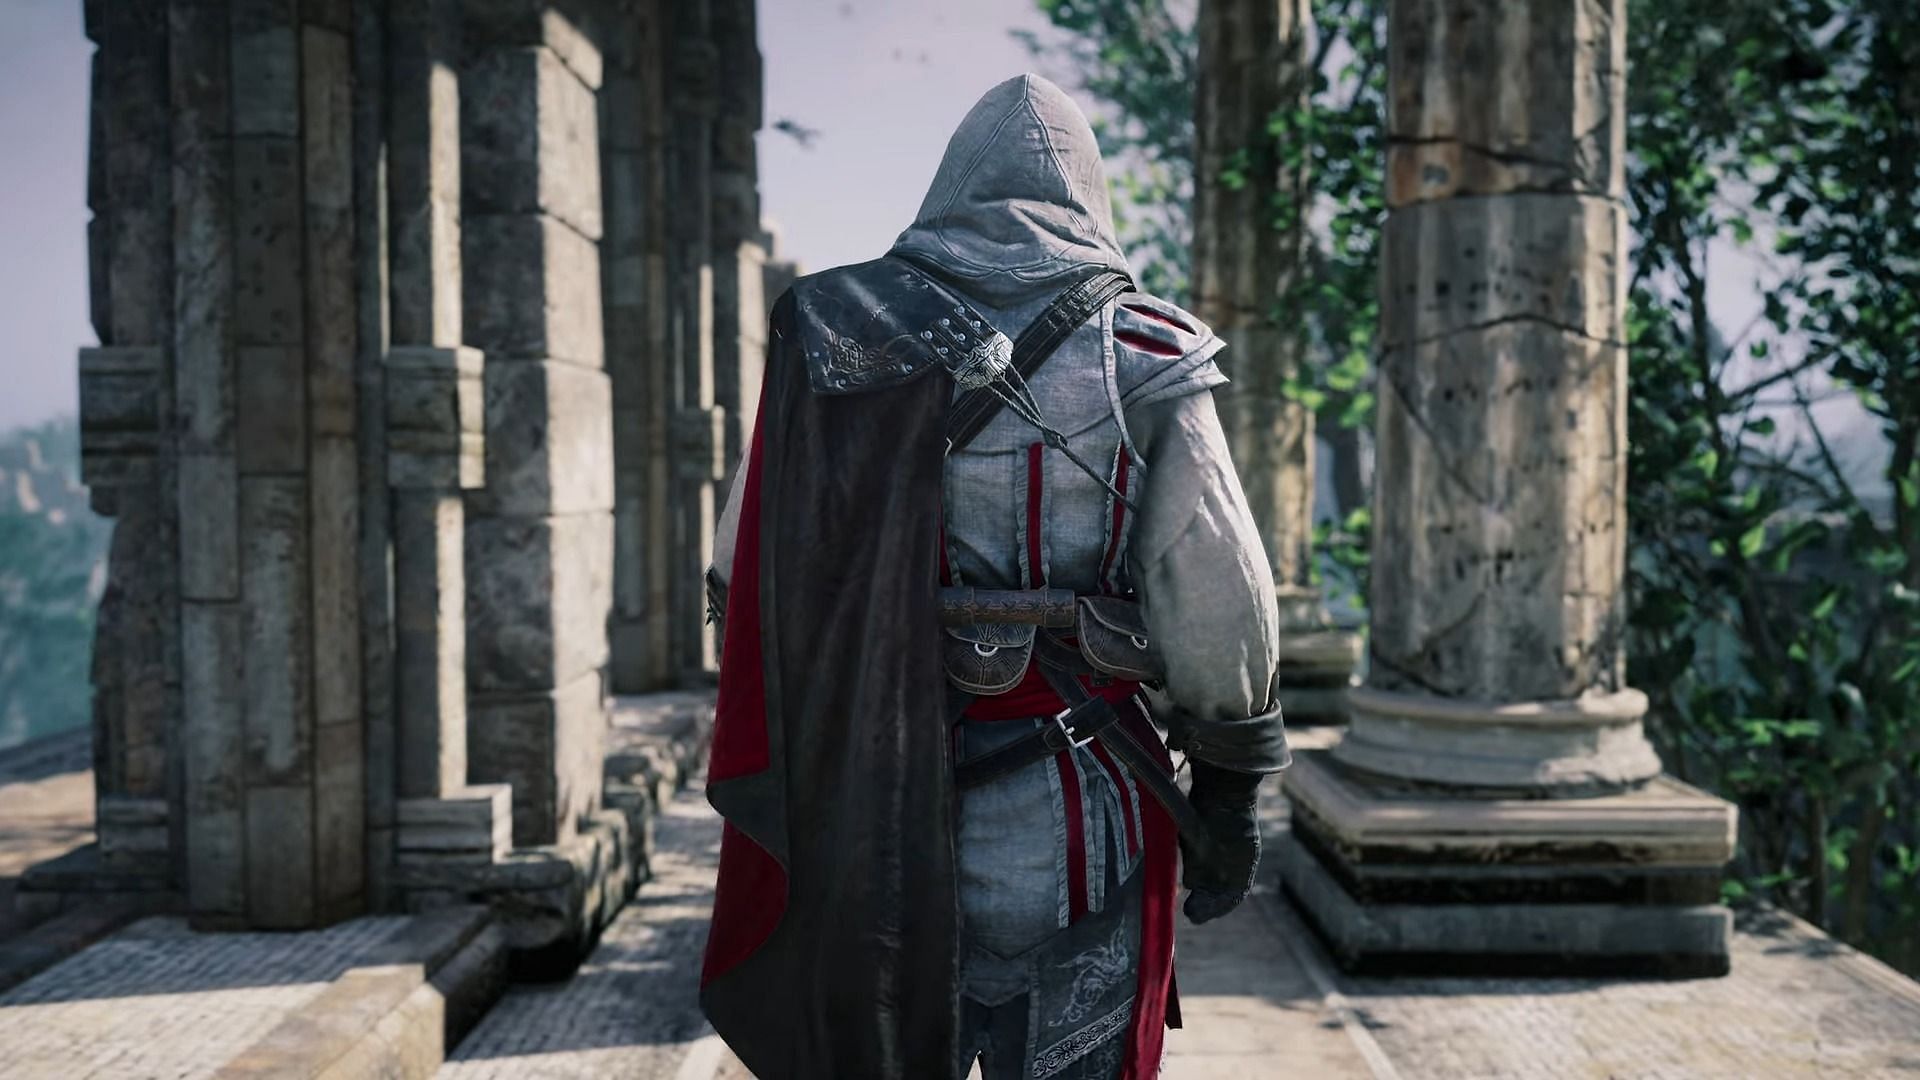 Assassins Creed 2 - Acquire